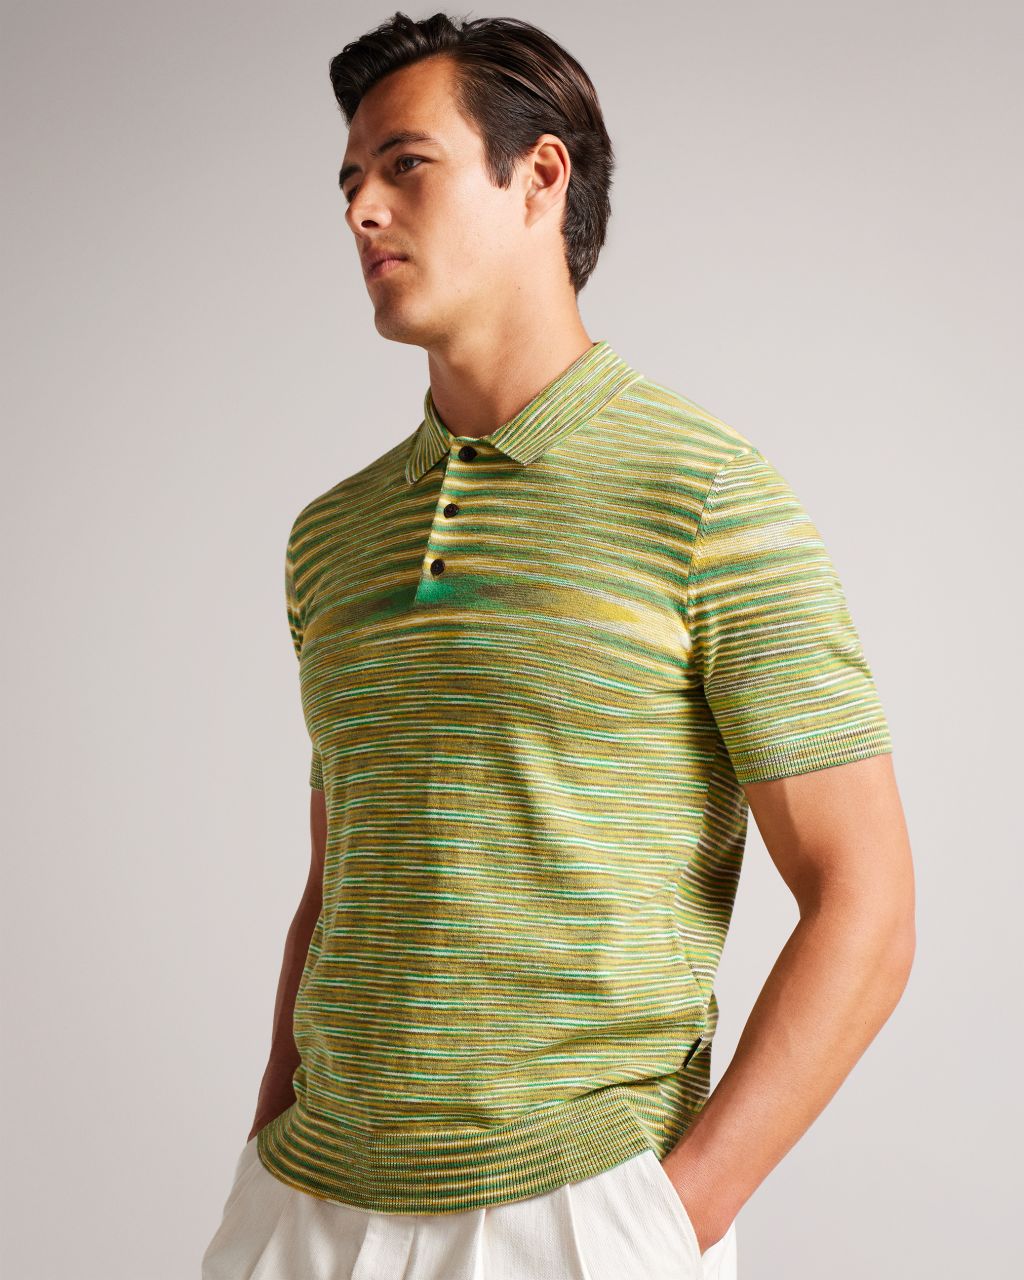 Ted Baker Men's Space Dye Stripe Knitted Polo Shirt in Bright Green, Pentle, Cotton